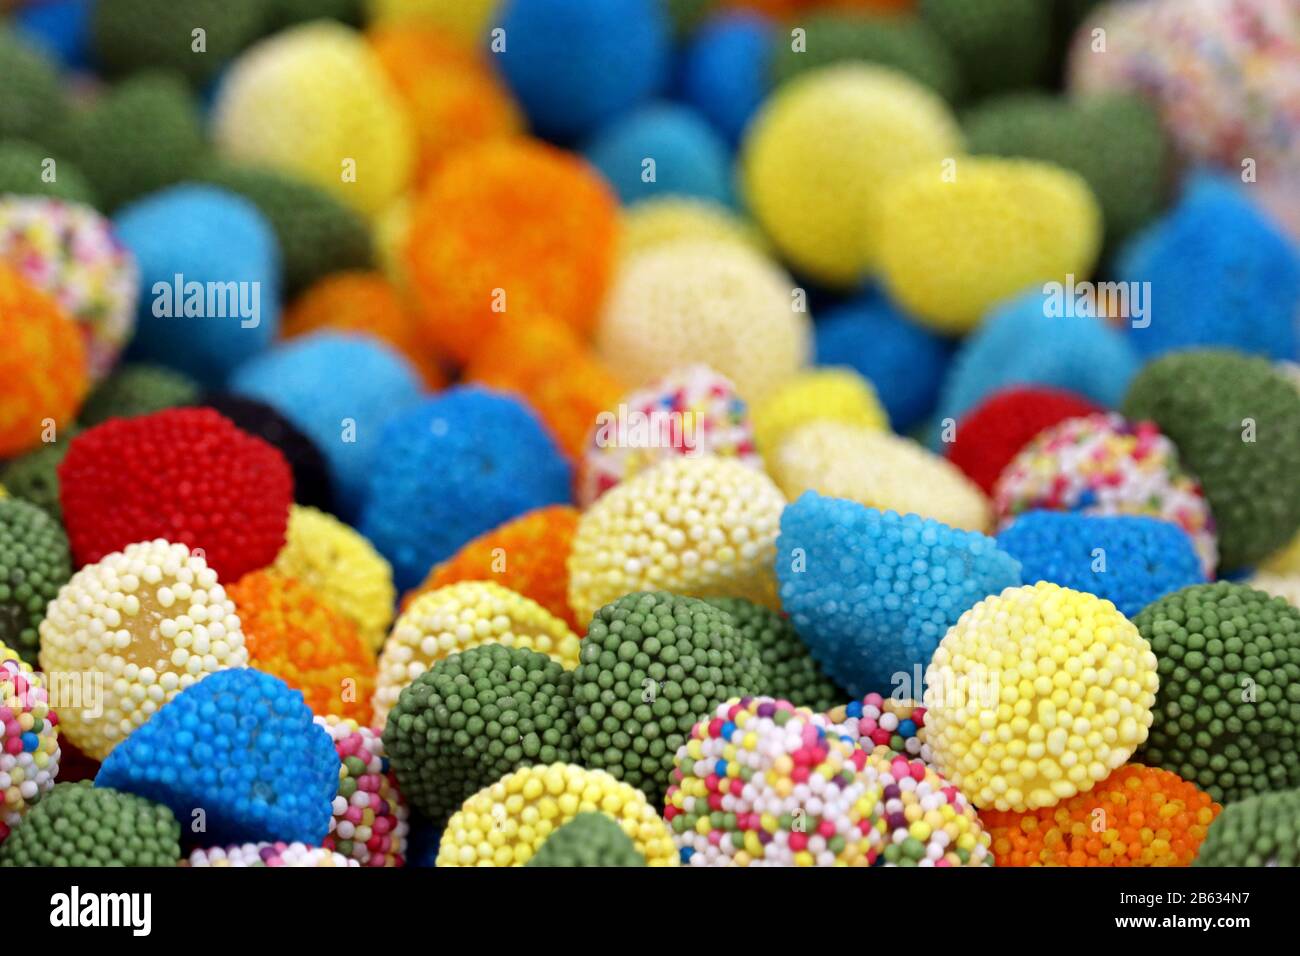 colorful GUMBALLS photo Details about   Original PHOTOGRAPH of RETRO Candy 